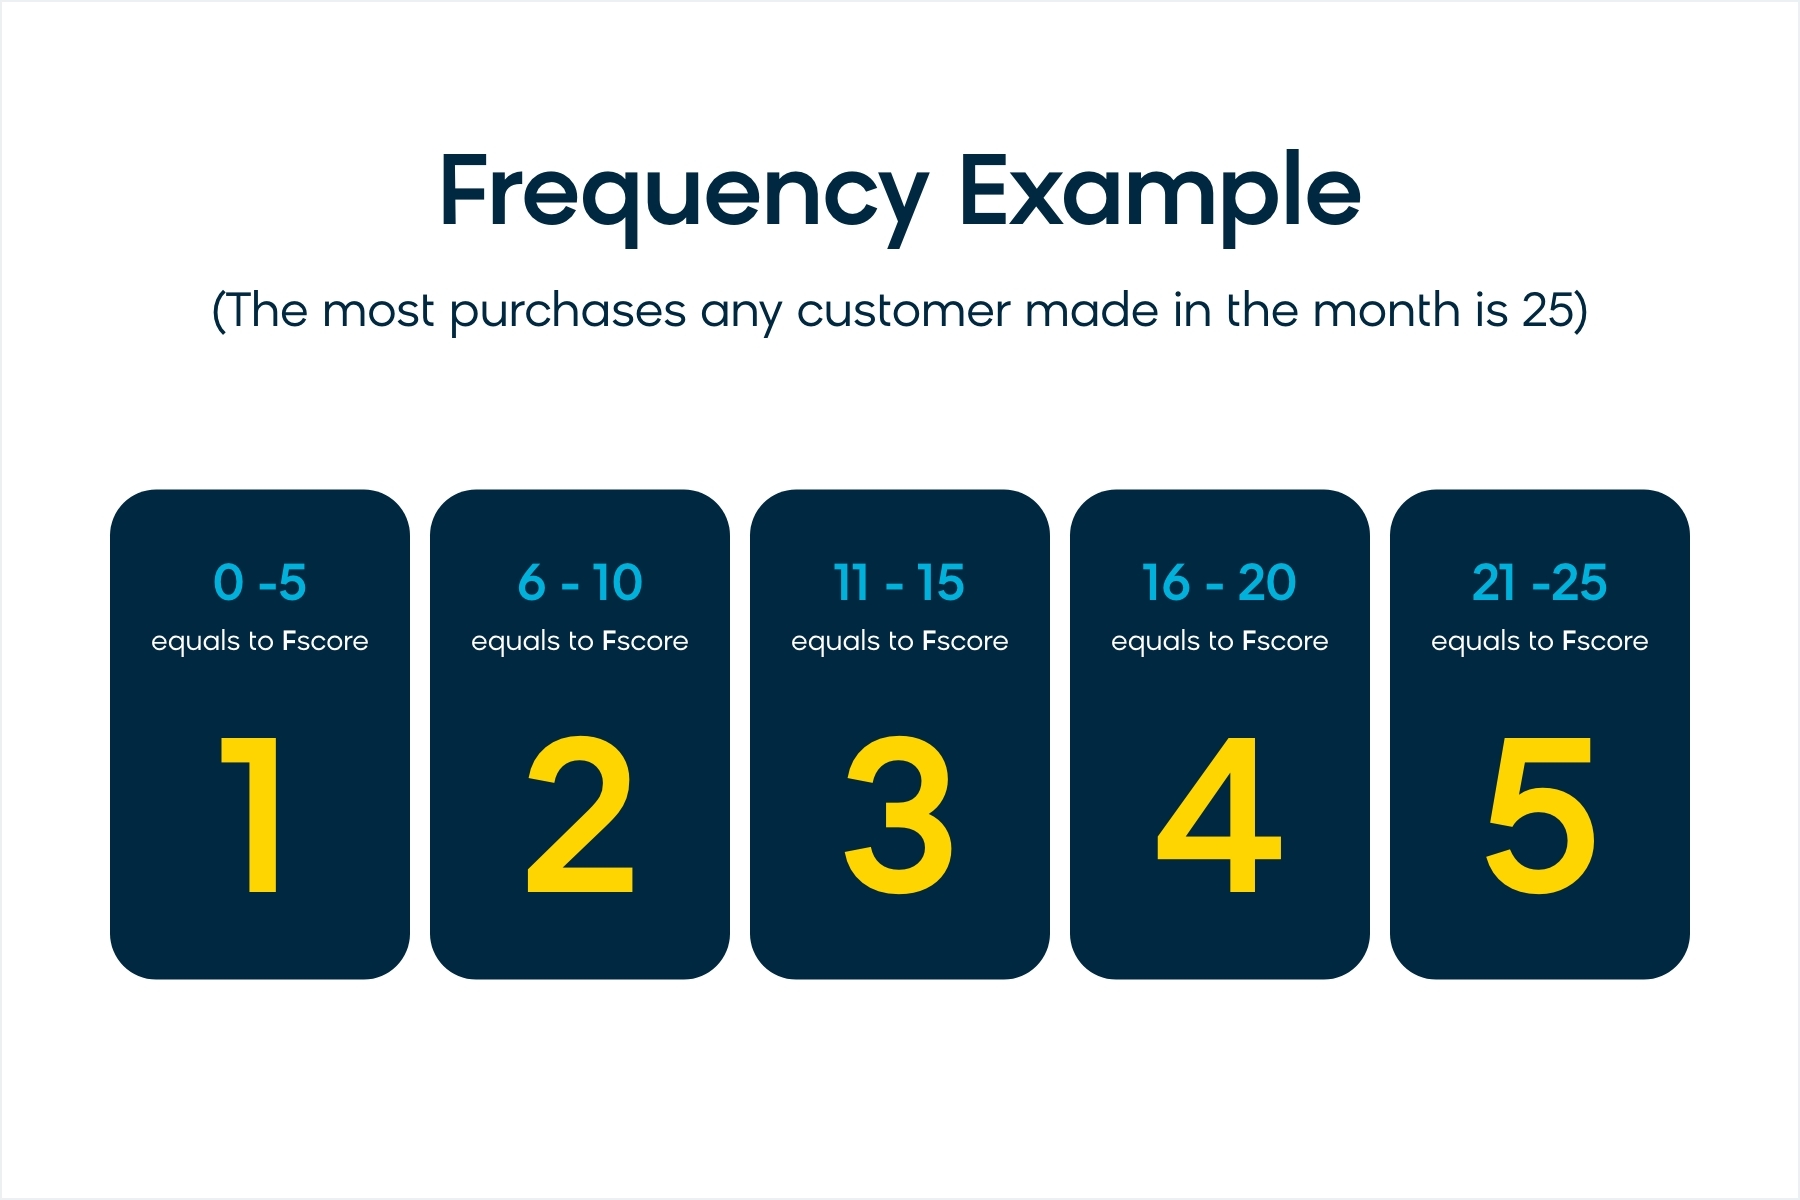 An example of frequency scoring in RFM customer segmentation analysis